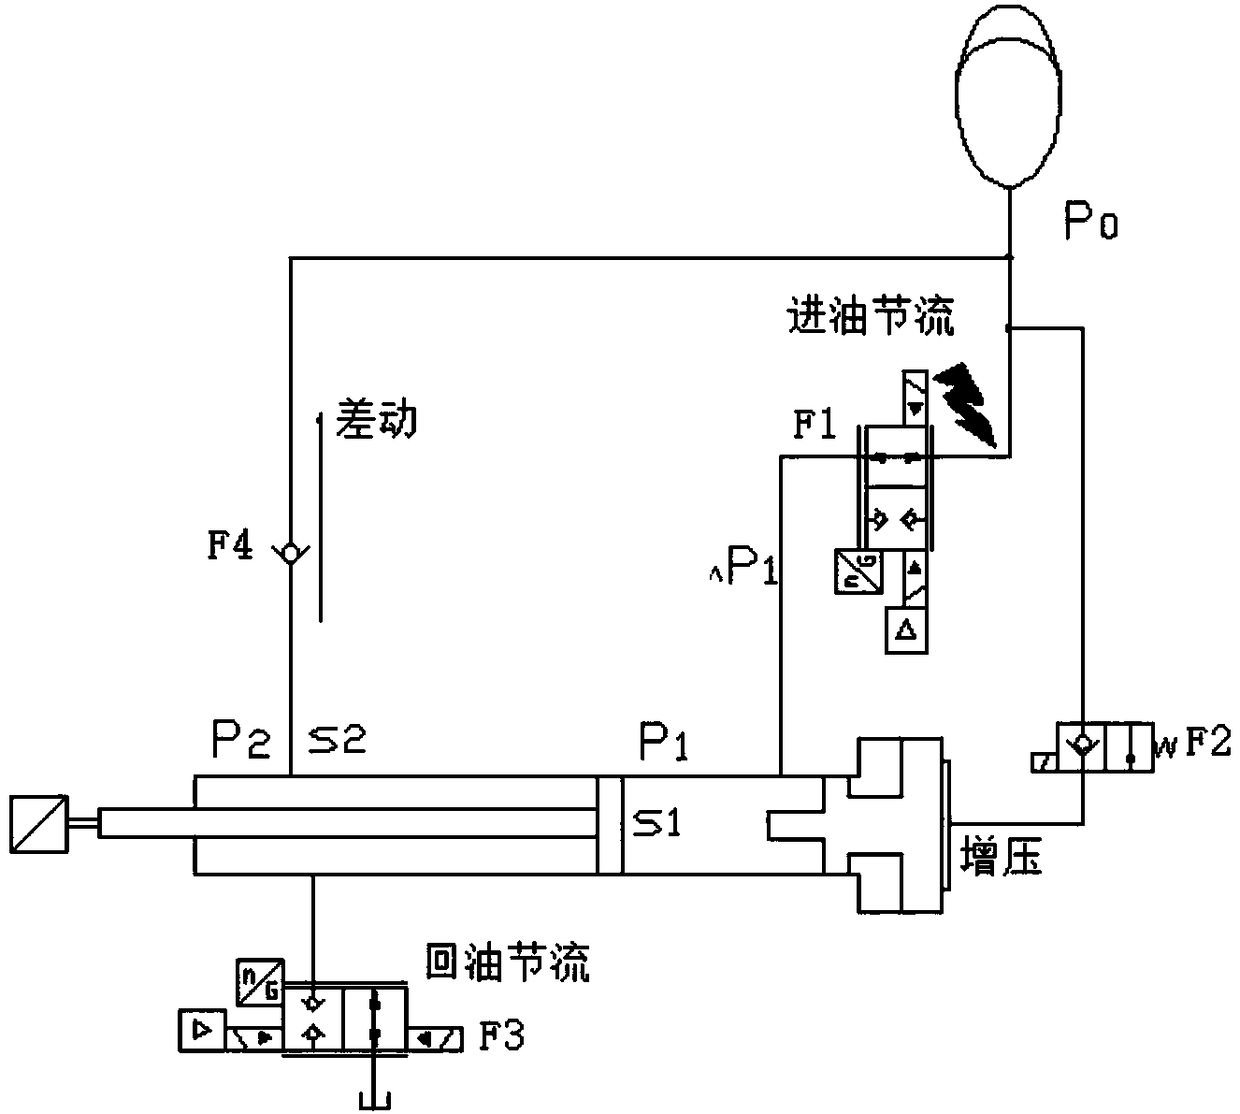 Pressure-jetting real-time controlled differential oil path system in die casting machine